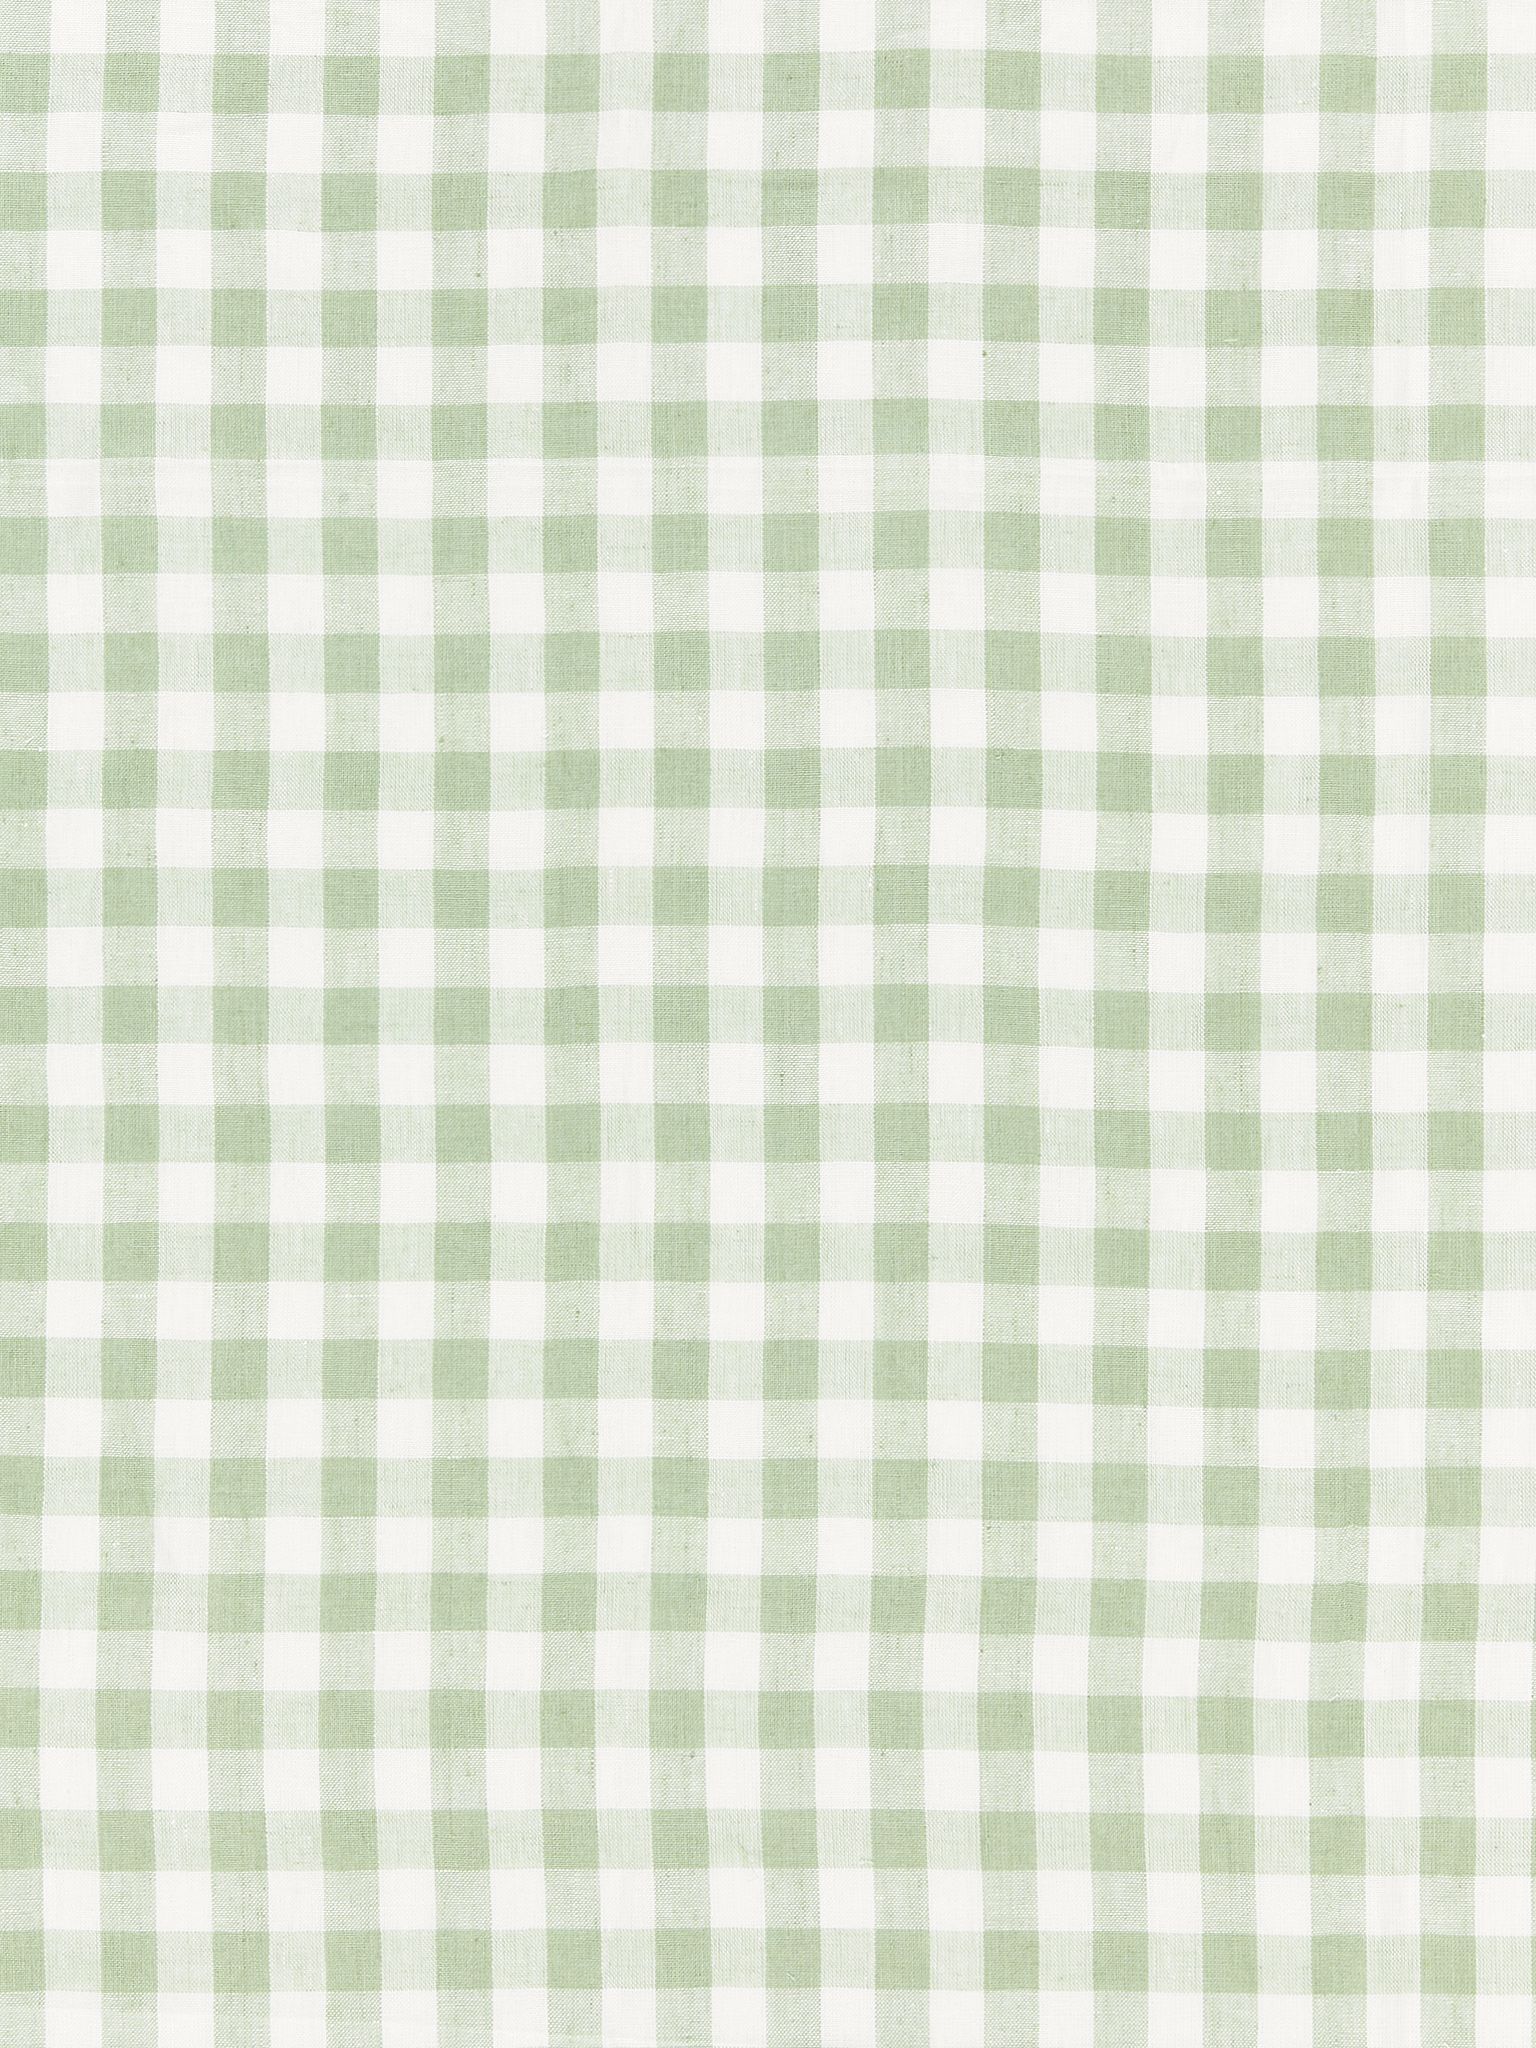 Swedish Linen Check fabric in willow color - pattern number SC 000327166 - by Scalamandre in the Scalamandre Fabrics Book 1 collection